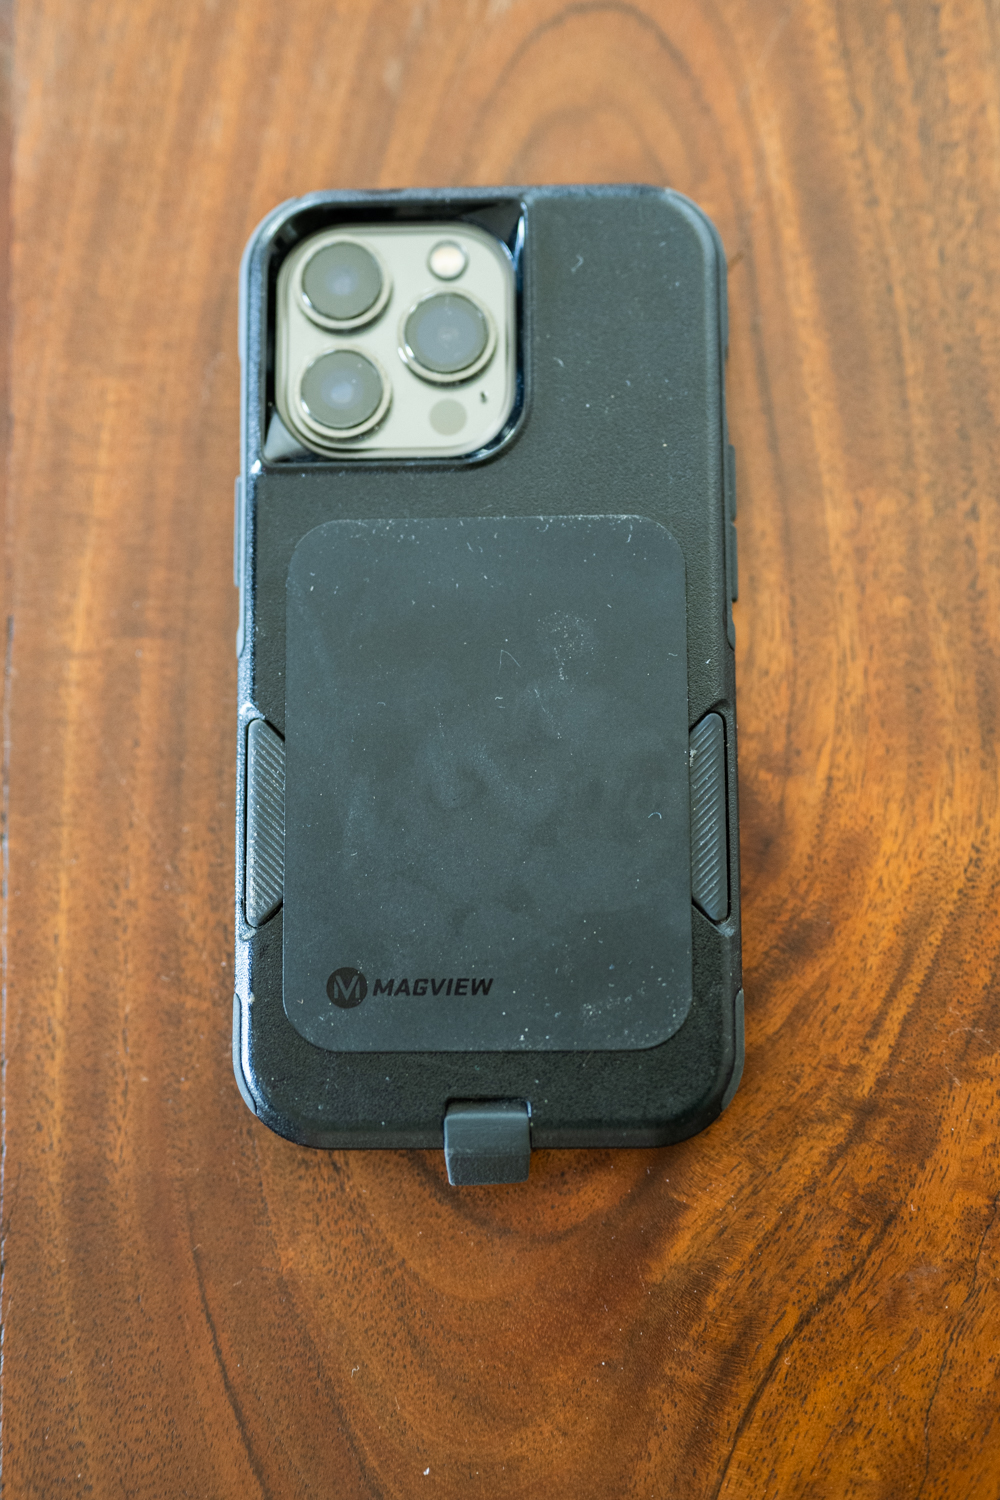 The MagView steel plate adheres well to most phone cases and keeps the magnets on the optic, not your phone.